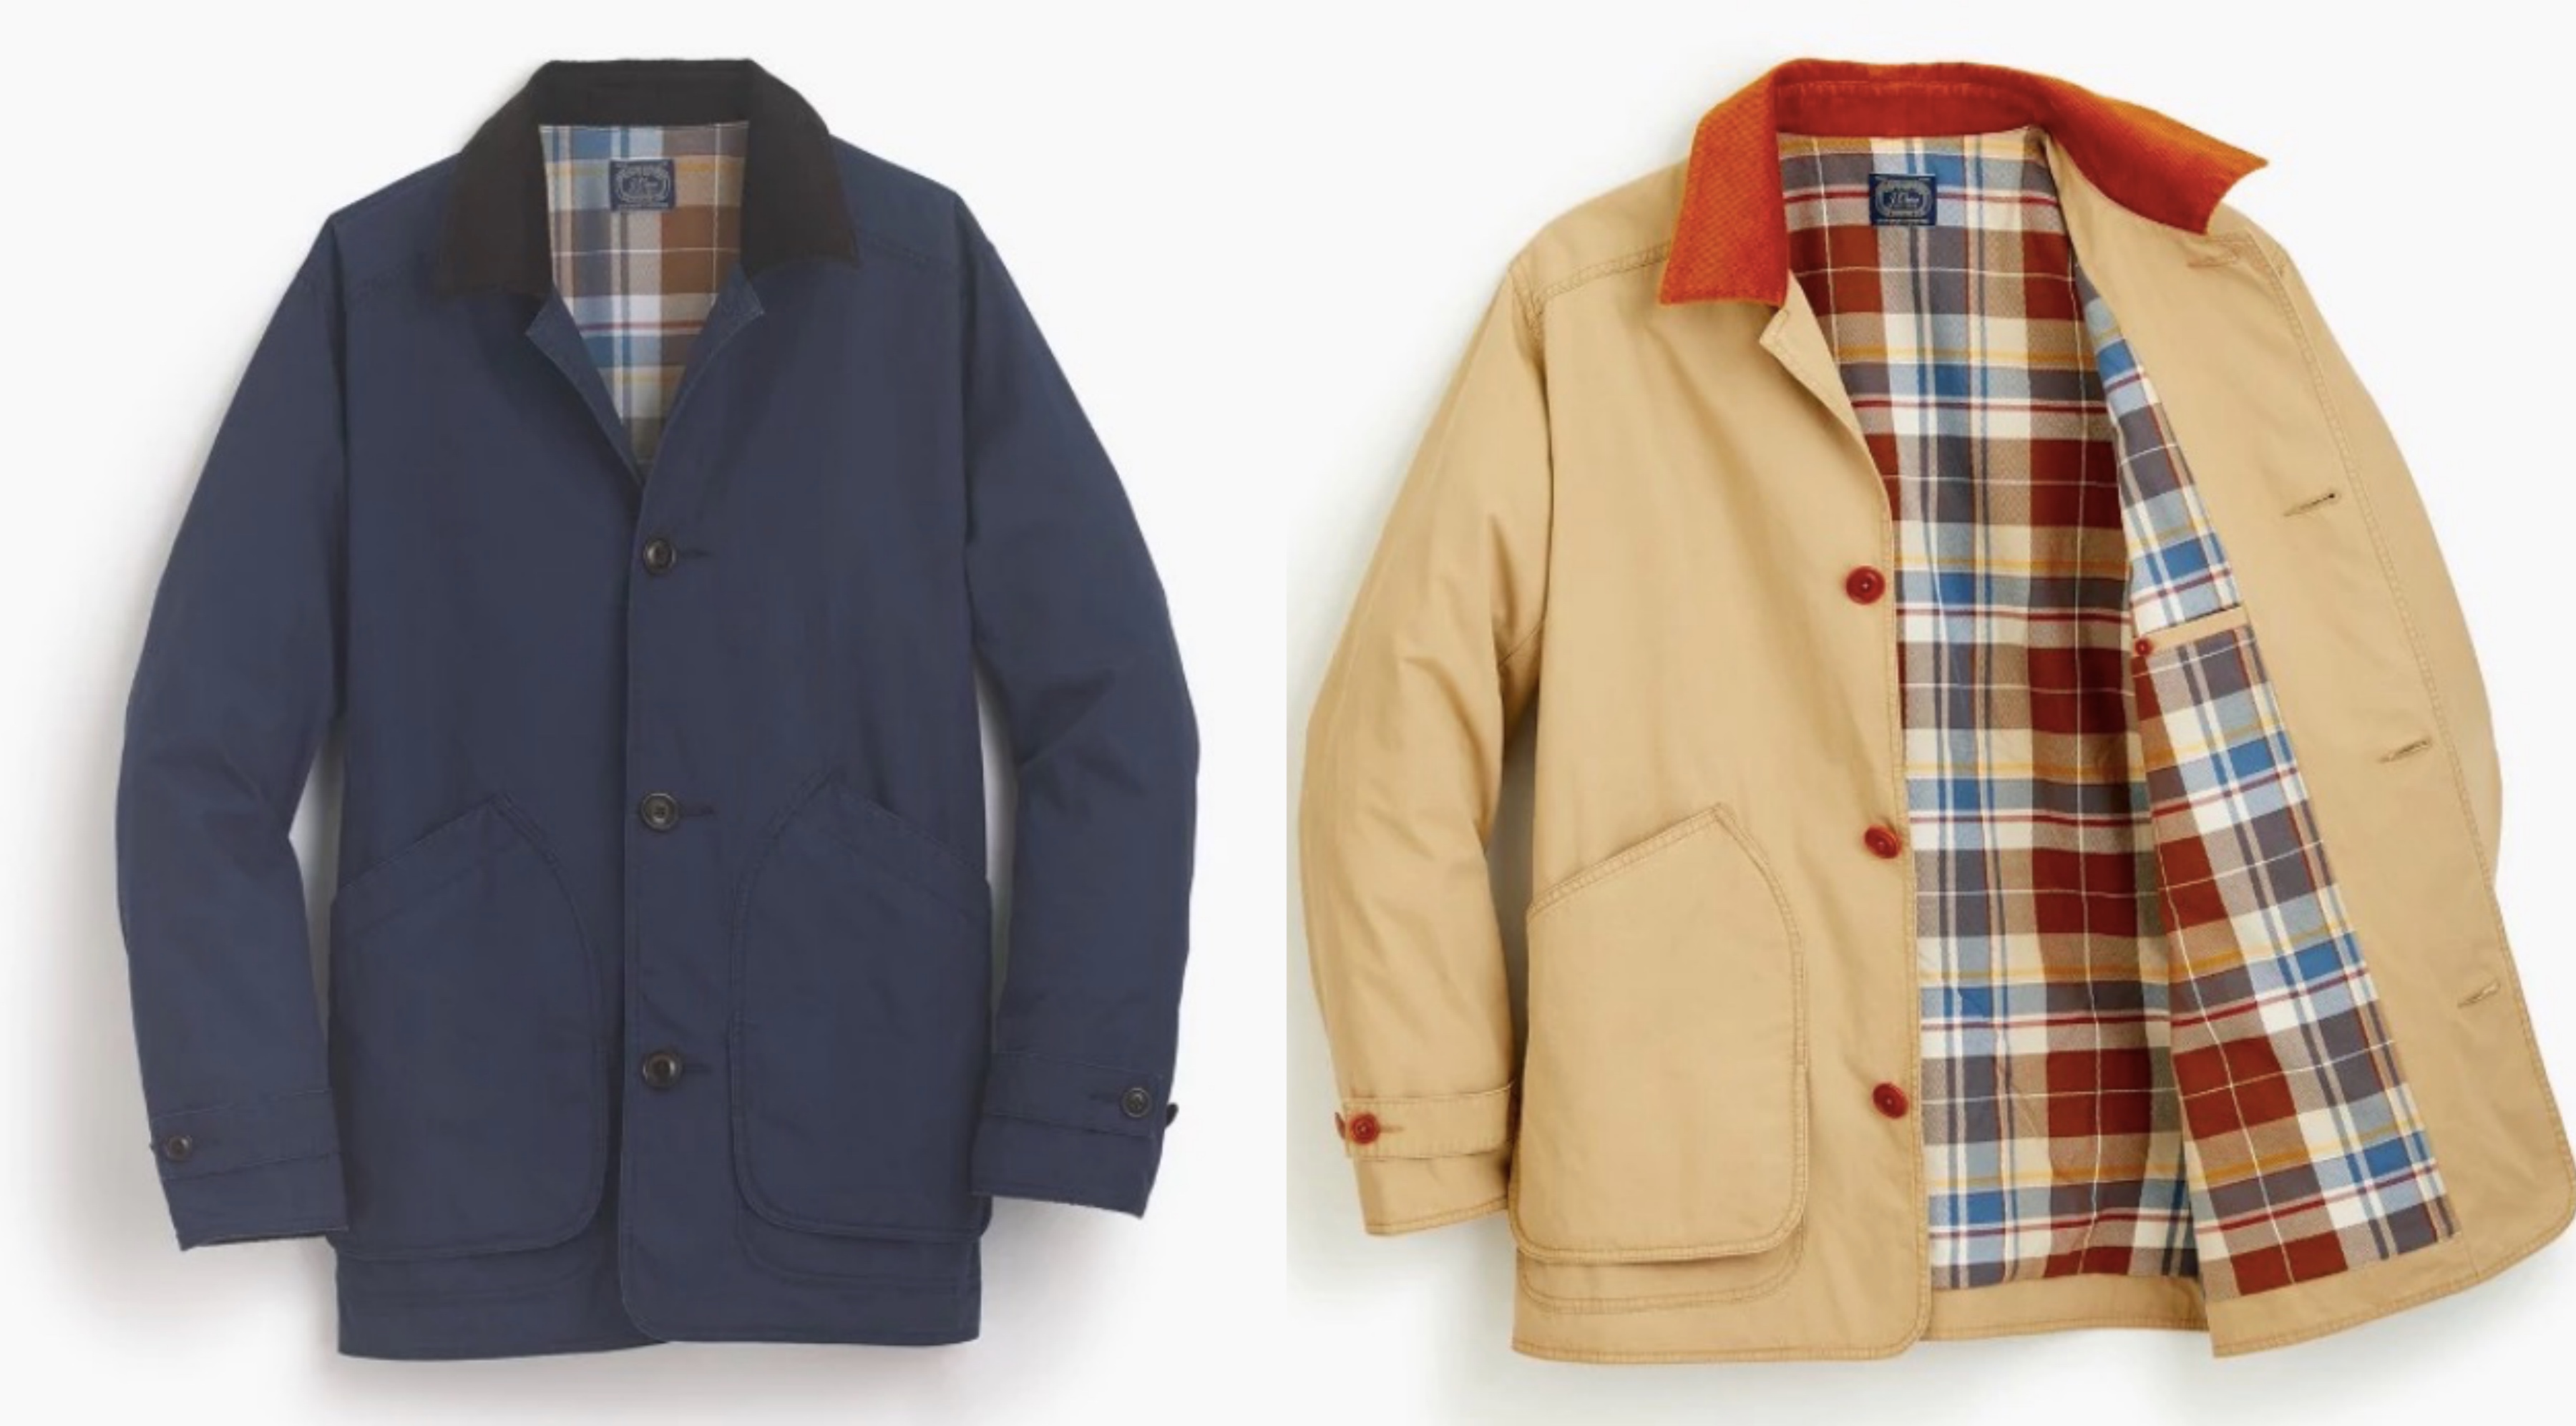 J.Crew's Heritage Collection Is A Re-Release Of Popular 80s Garments ...